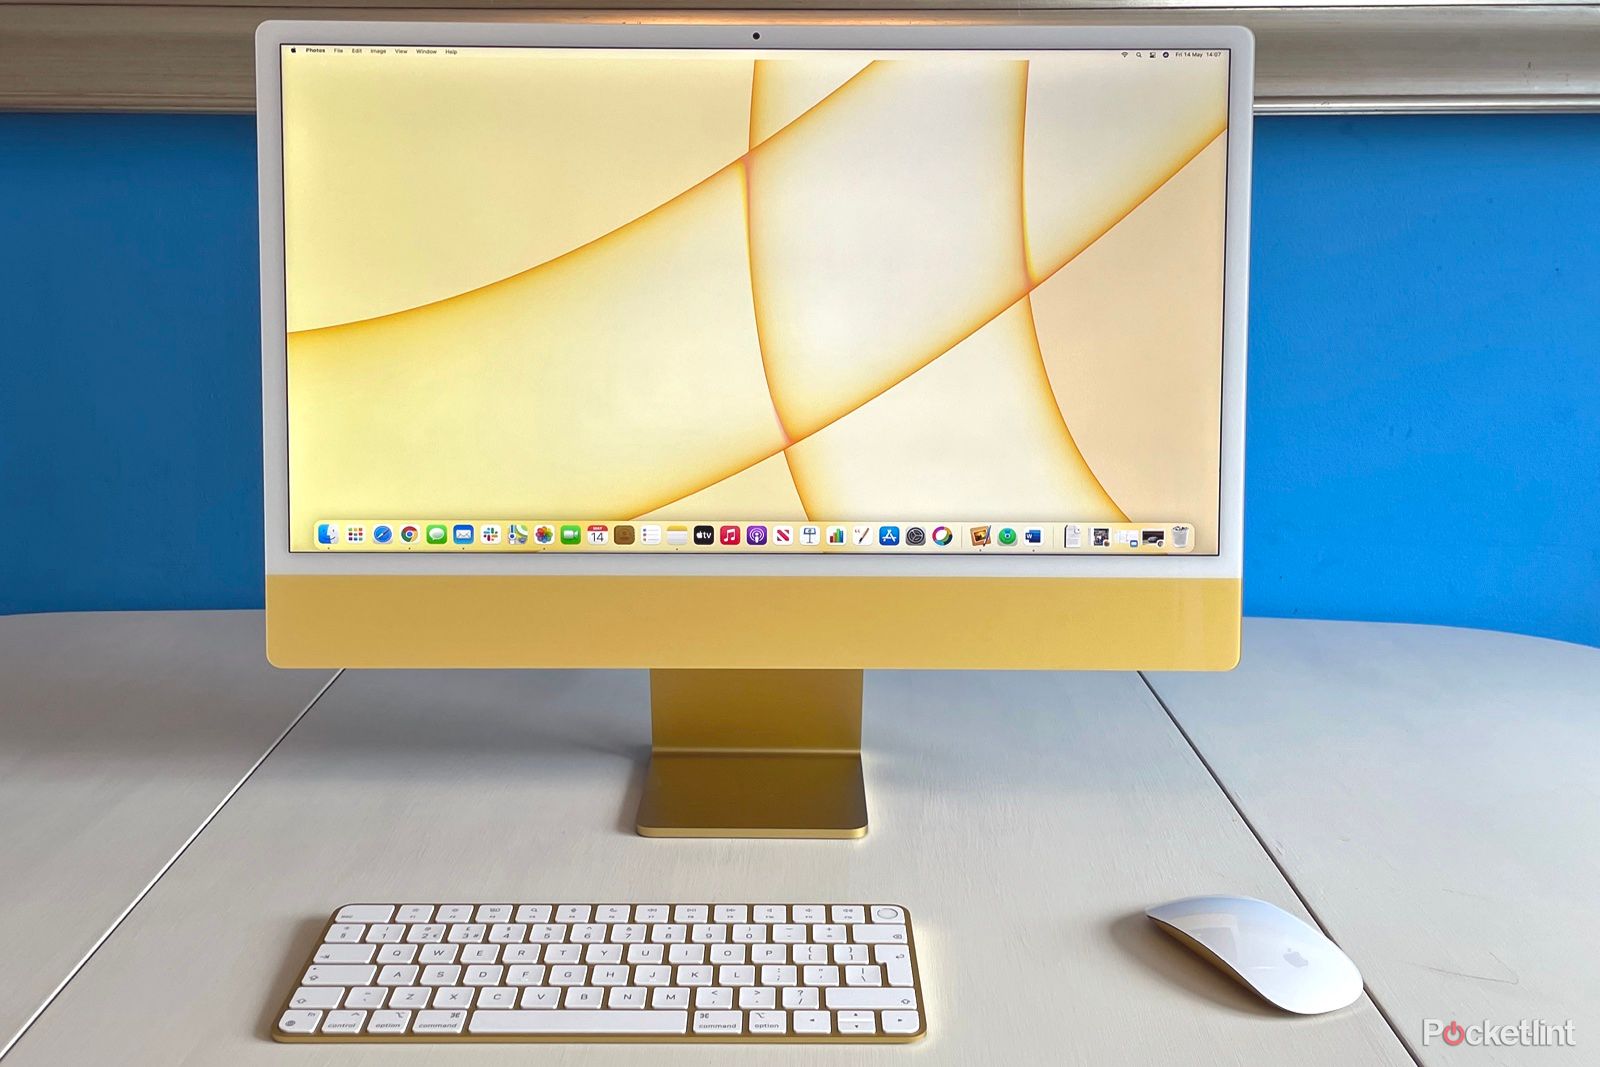 Multiple Macs rumored for WWDC 2023 - iMac, Mac Pro, or something else entirely?